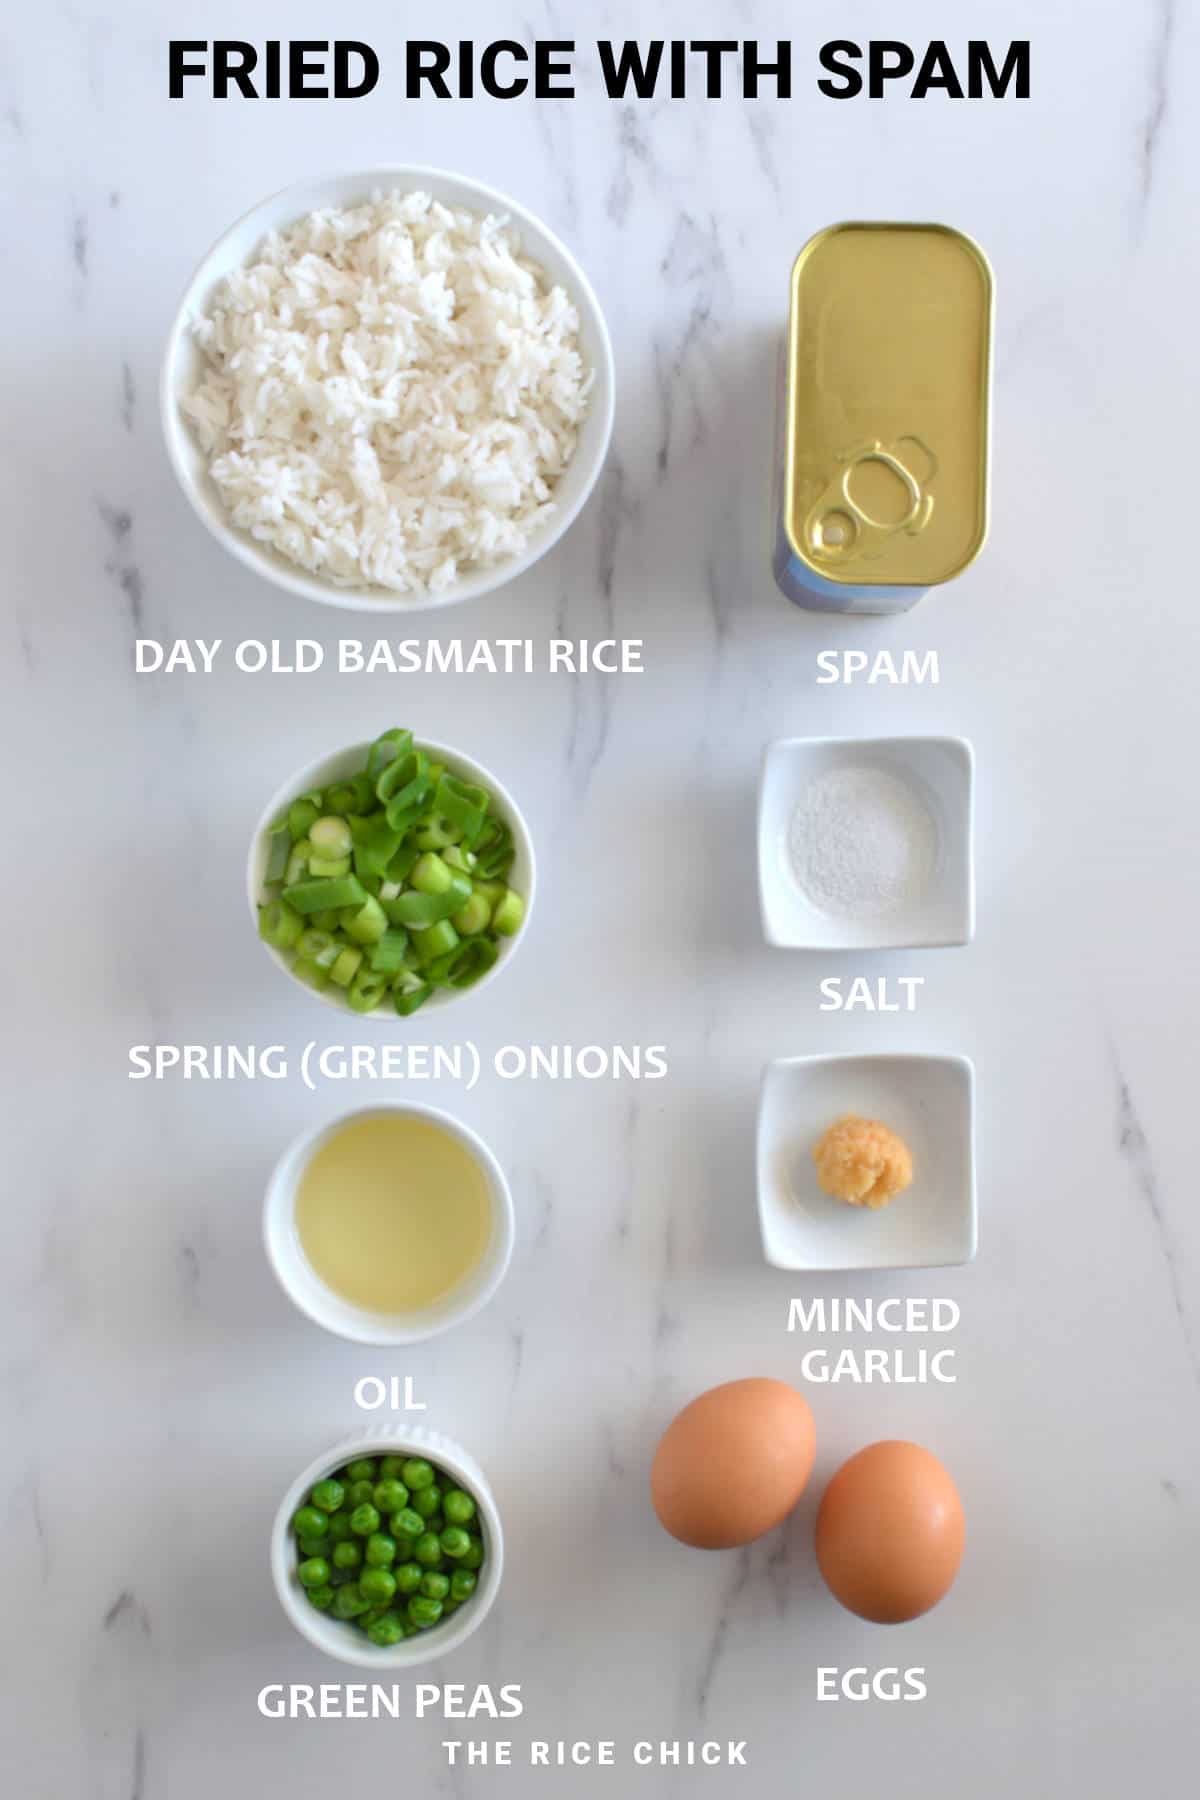 Ingredients fried rice with spam.